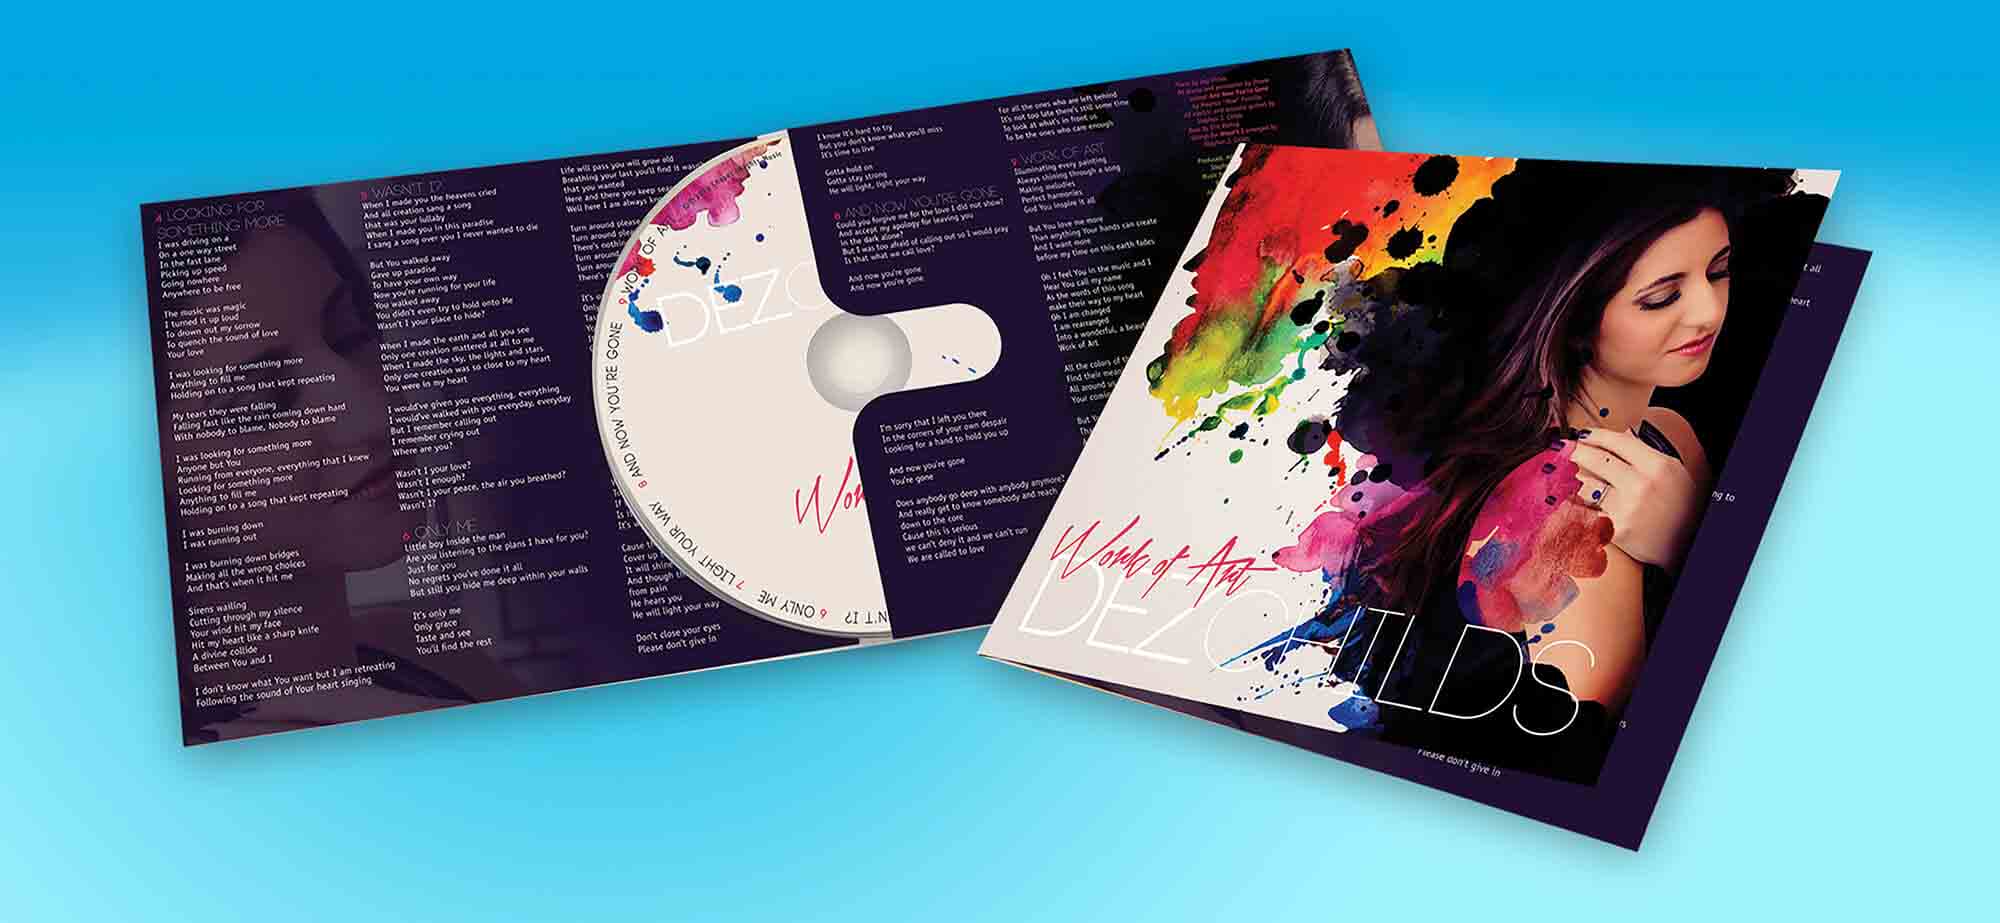 Get personalized CD design at The Design Studio at Disc Makers